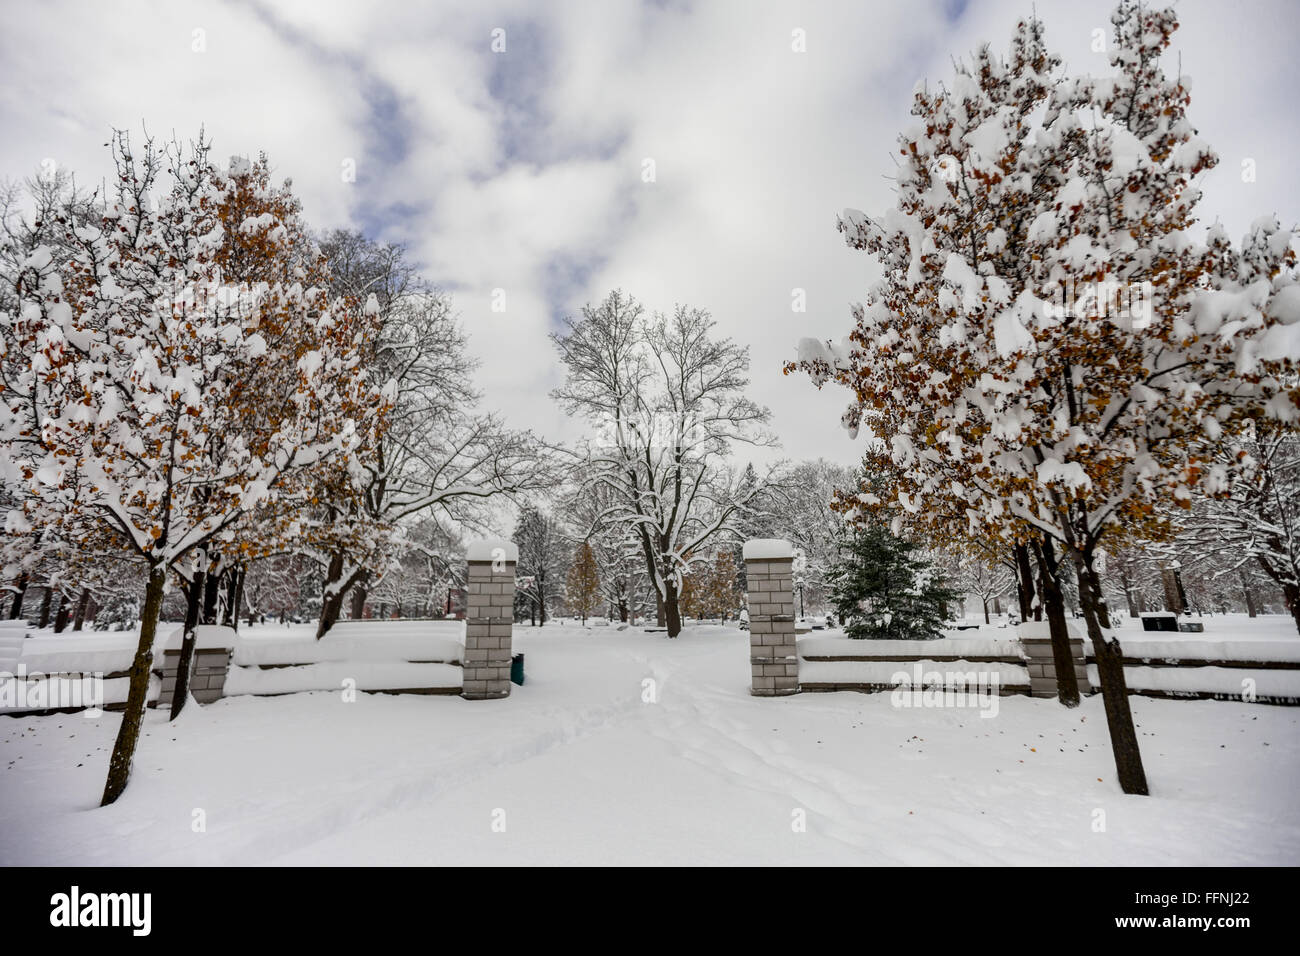 London, Canada - November 24, 2013. Trees and the entrance to Victoria Park are covered in snow after more than 60cm fell. Stock Photo